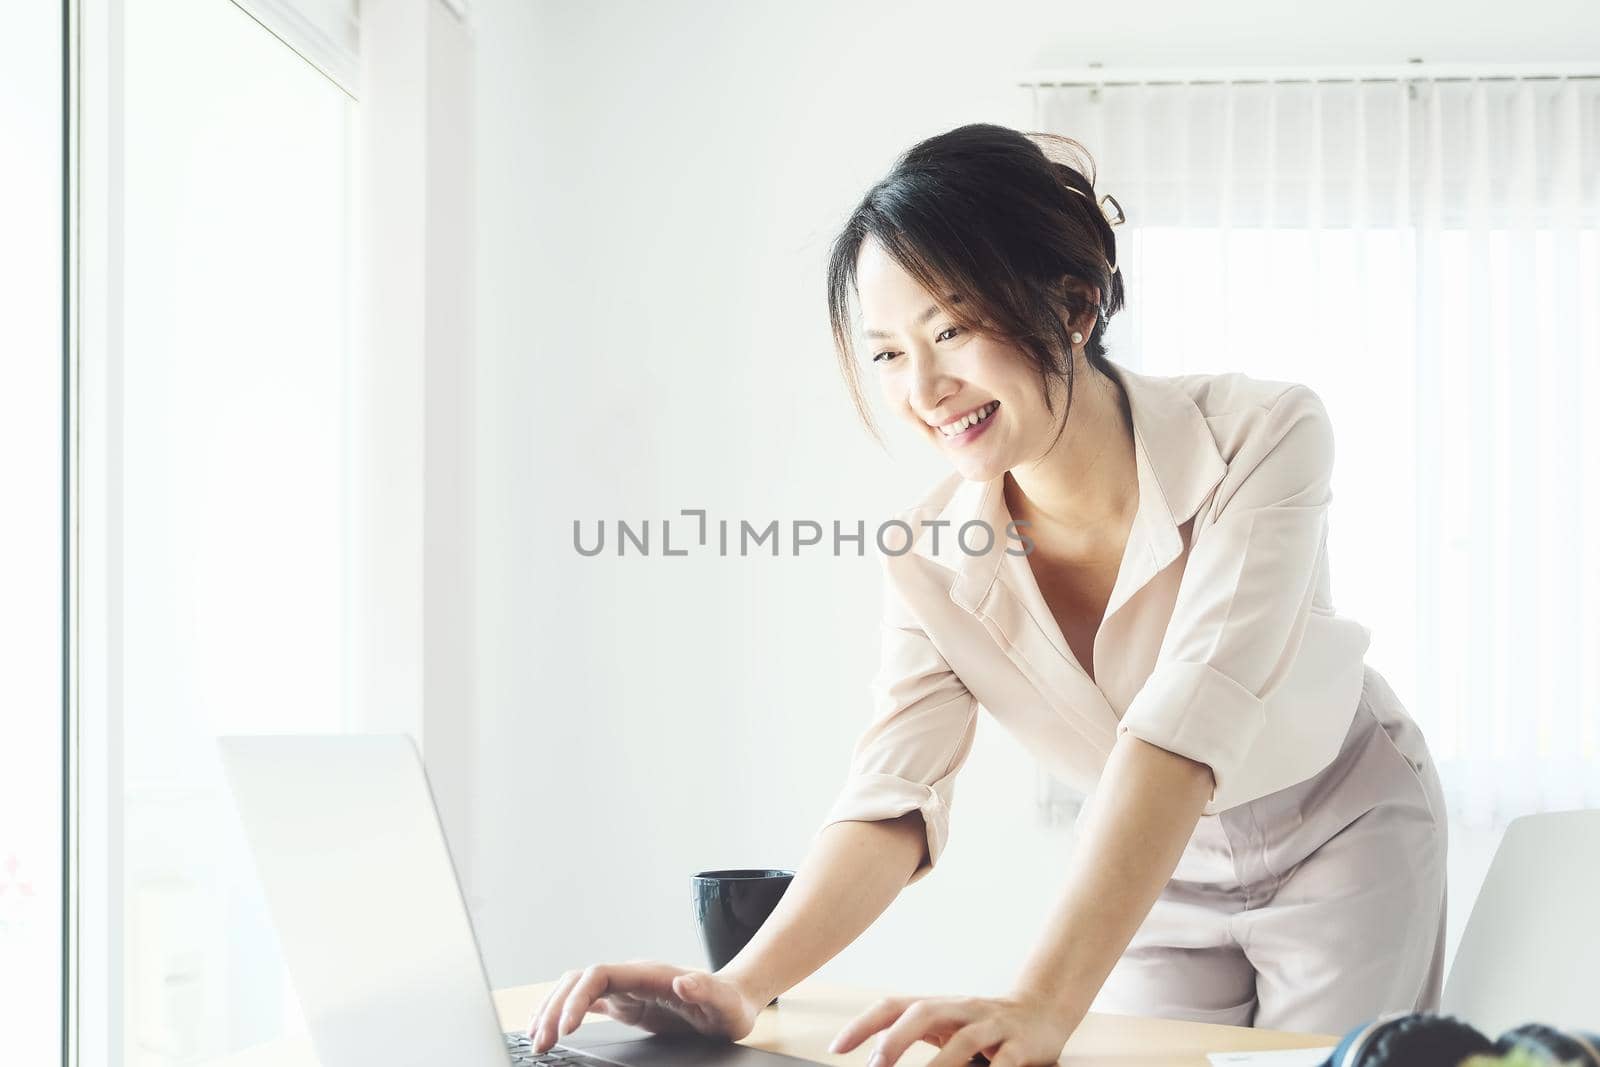 new normal, a businesswoman using computer to work for a company Via the internet on your desk at home